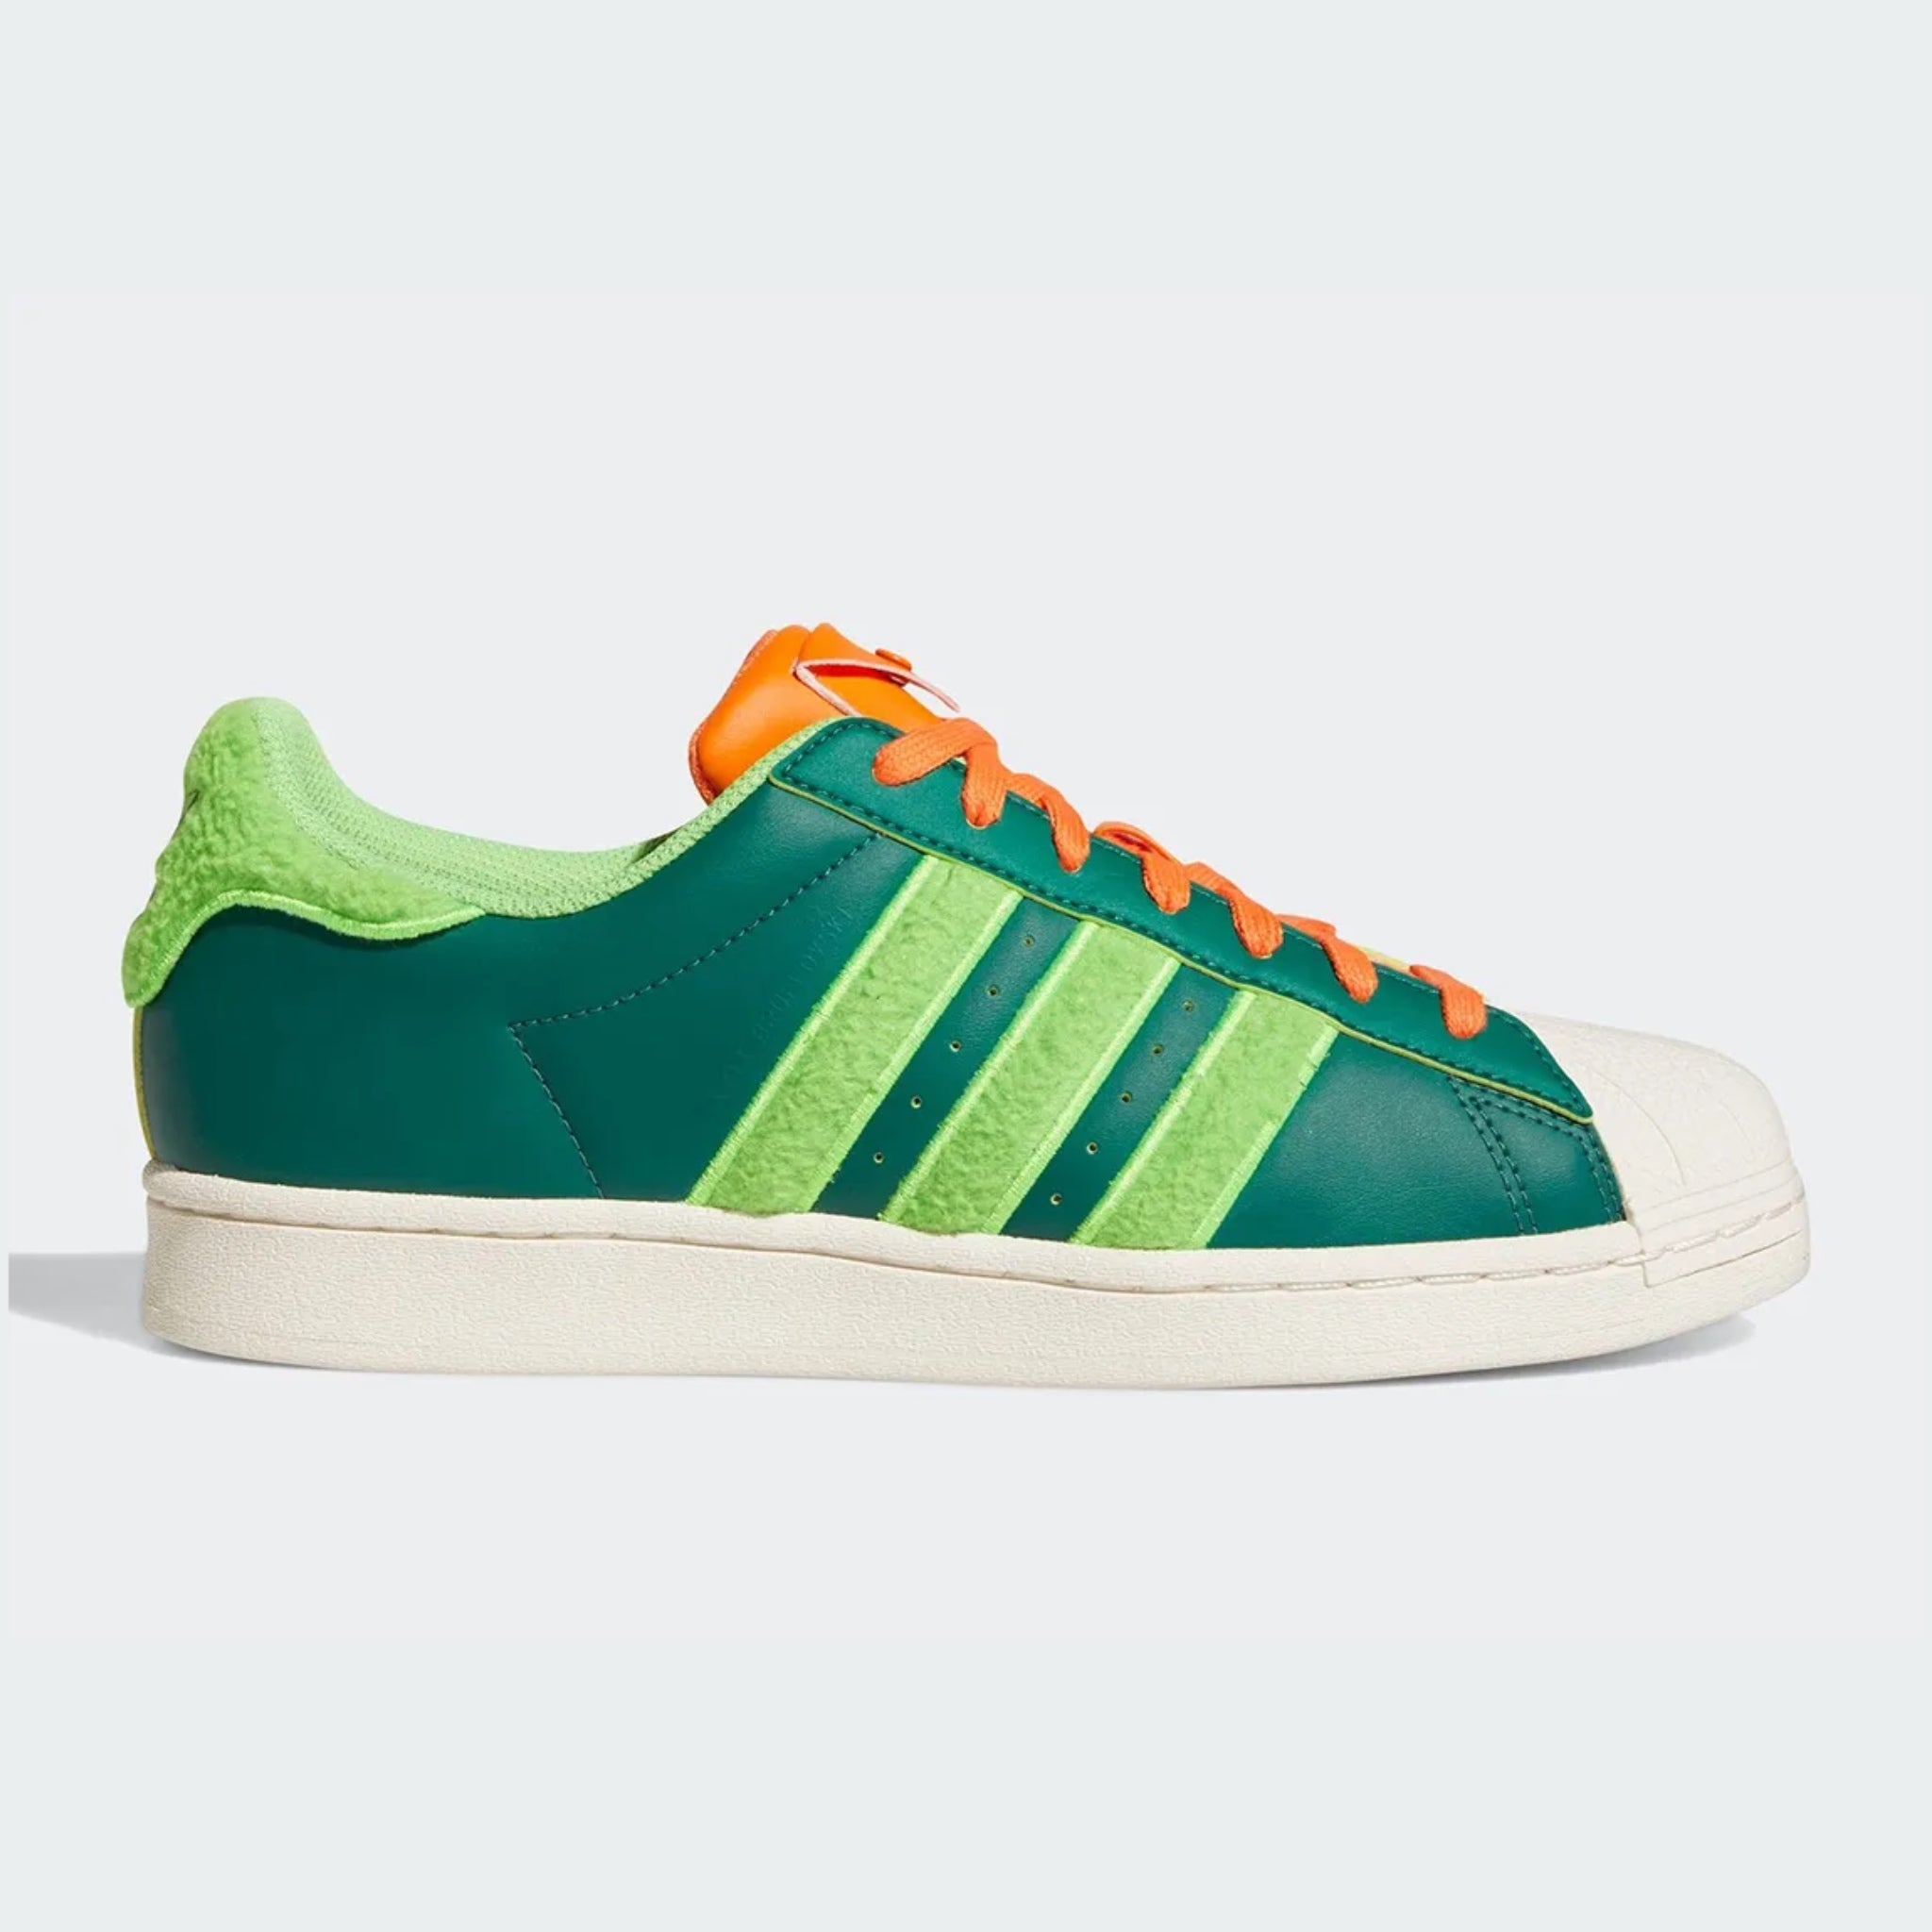 South Park x Adidas Superstar "Kyle" | GY6490 | $299.99 | $299.99 | $299.99 | Shoes | Marching Dogs